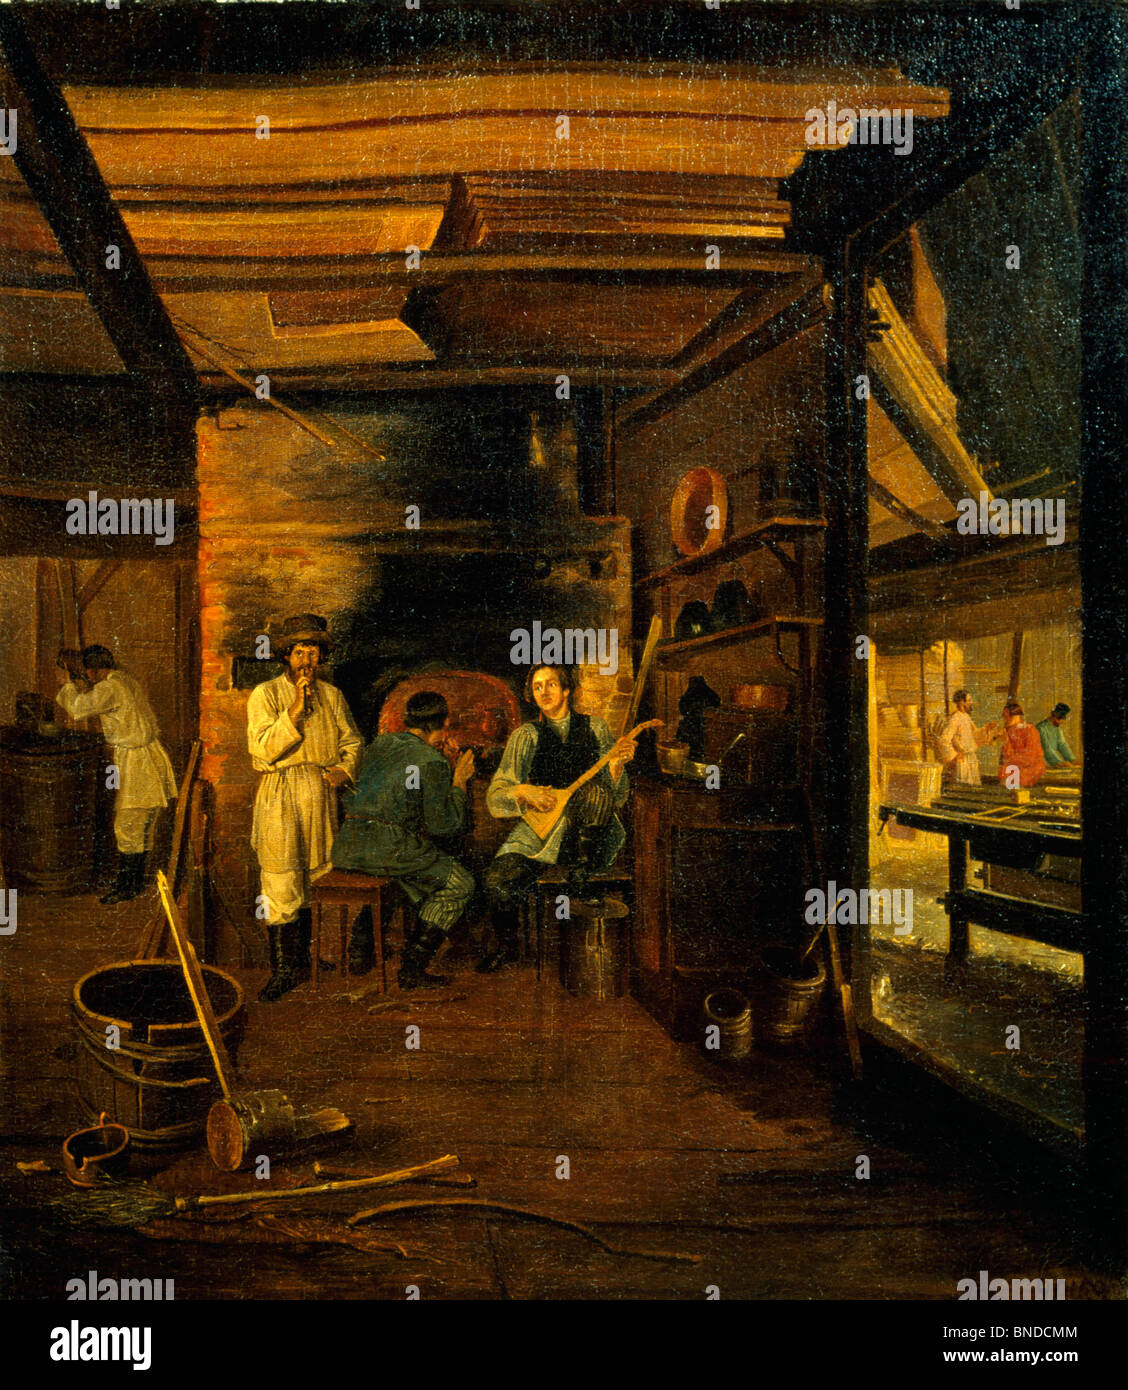 Russia, Tver Regional Art Gallery, Joiner's Shop by Lavr Kuzmich Plakhov, oil on canvas, circa 1833, (1810-1881) Stock Photo